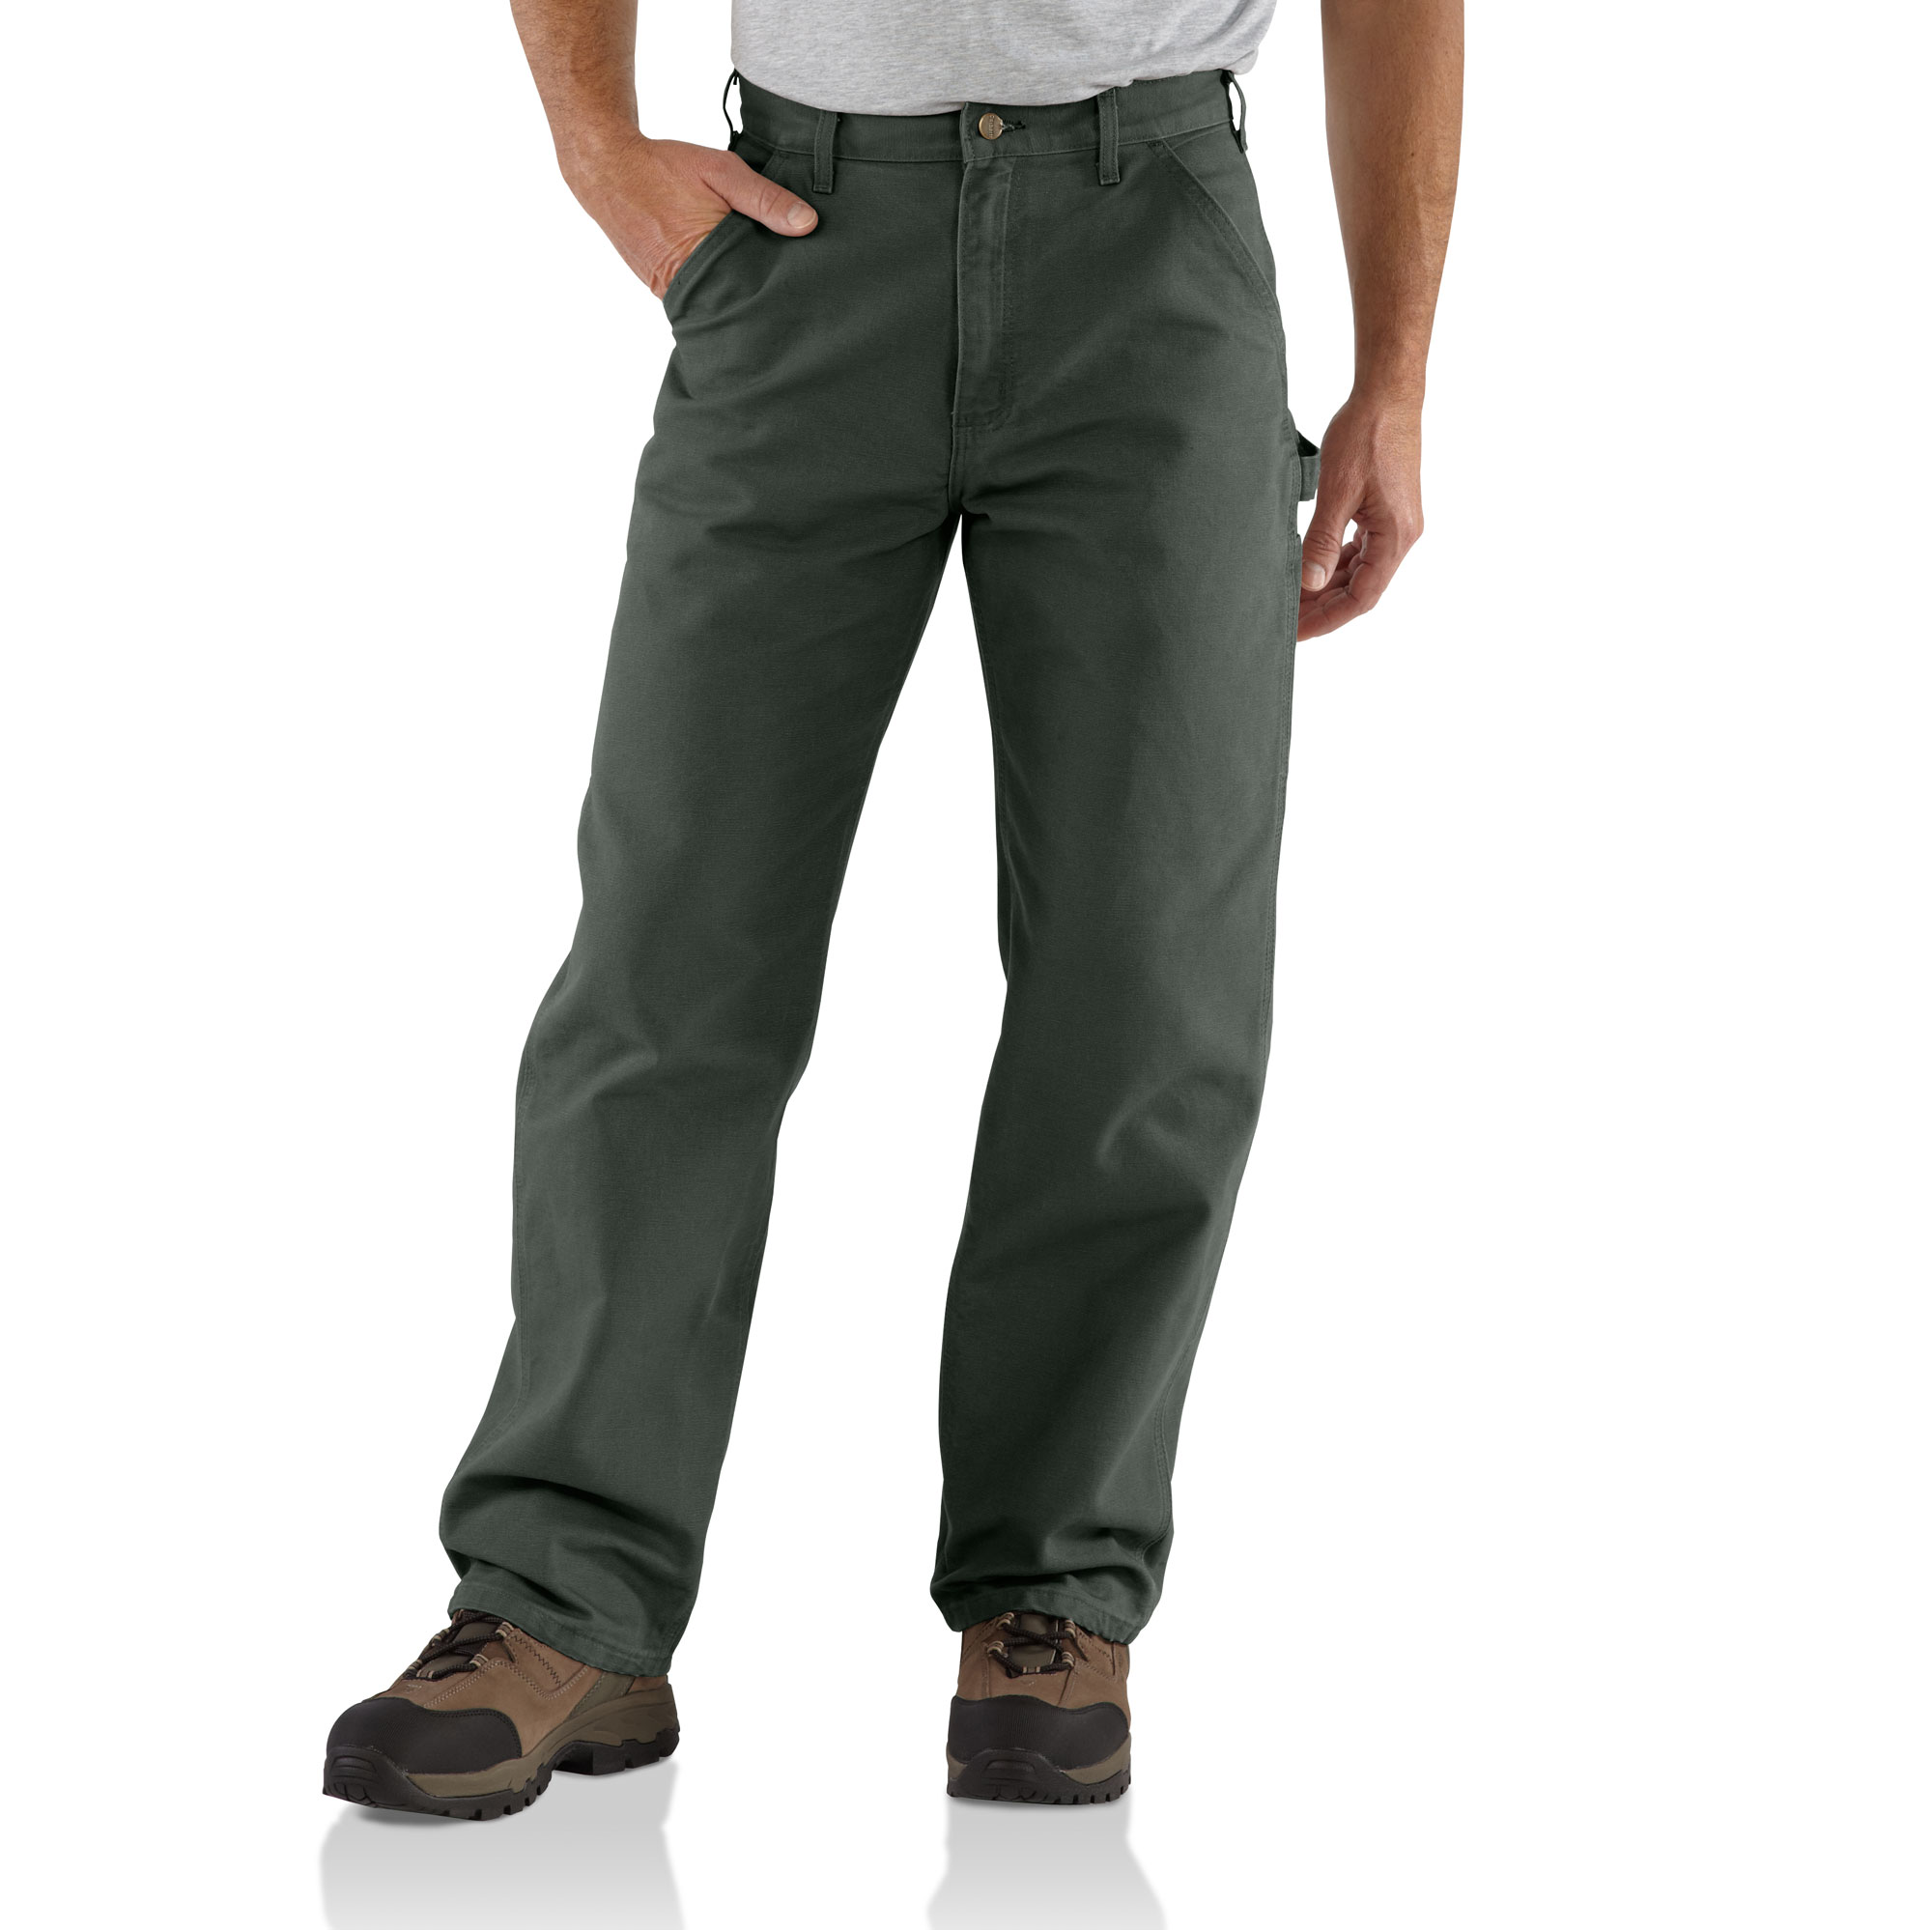 Men's Carhartt Loose Fit Washed Duck Utility Pant